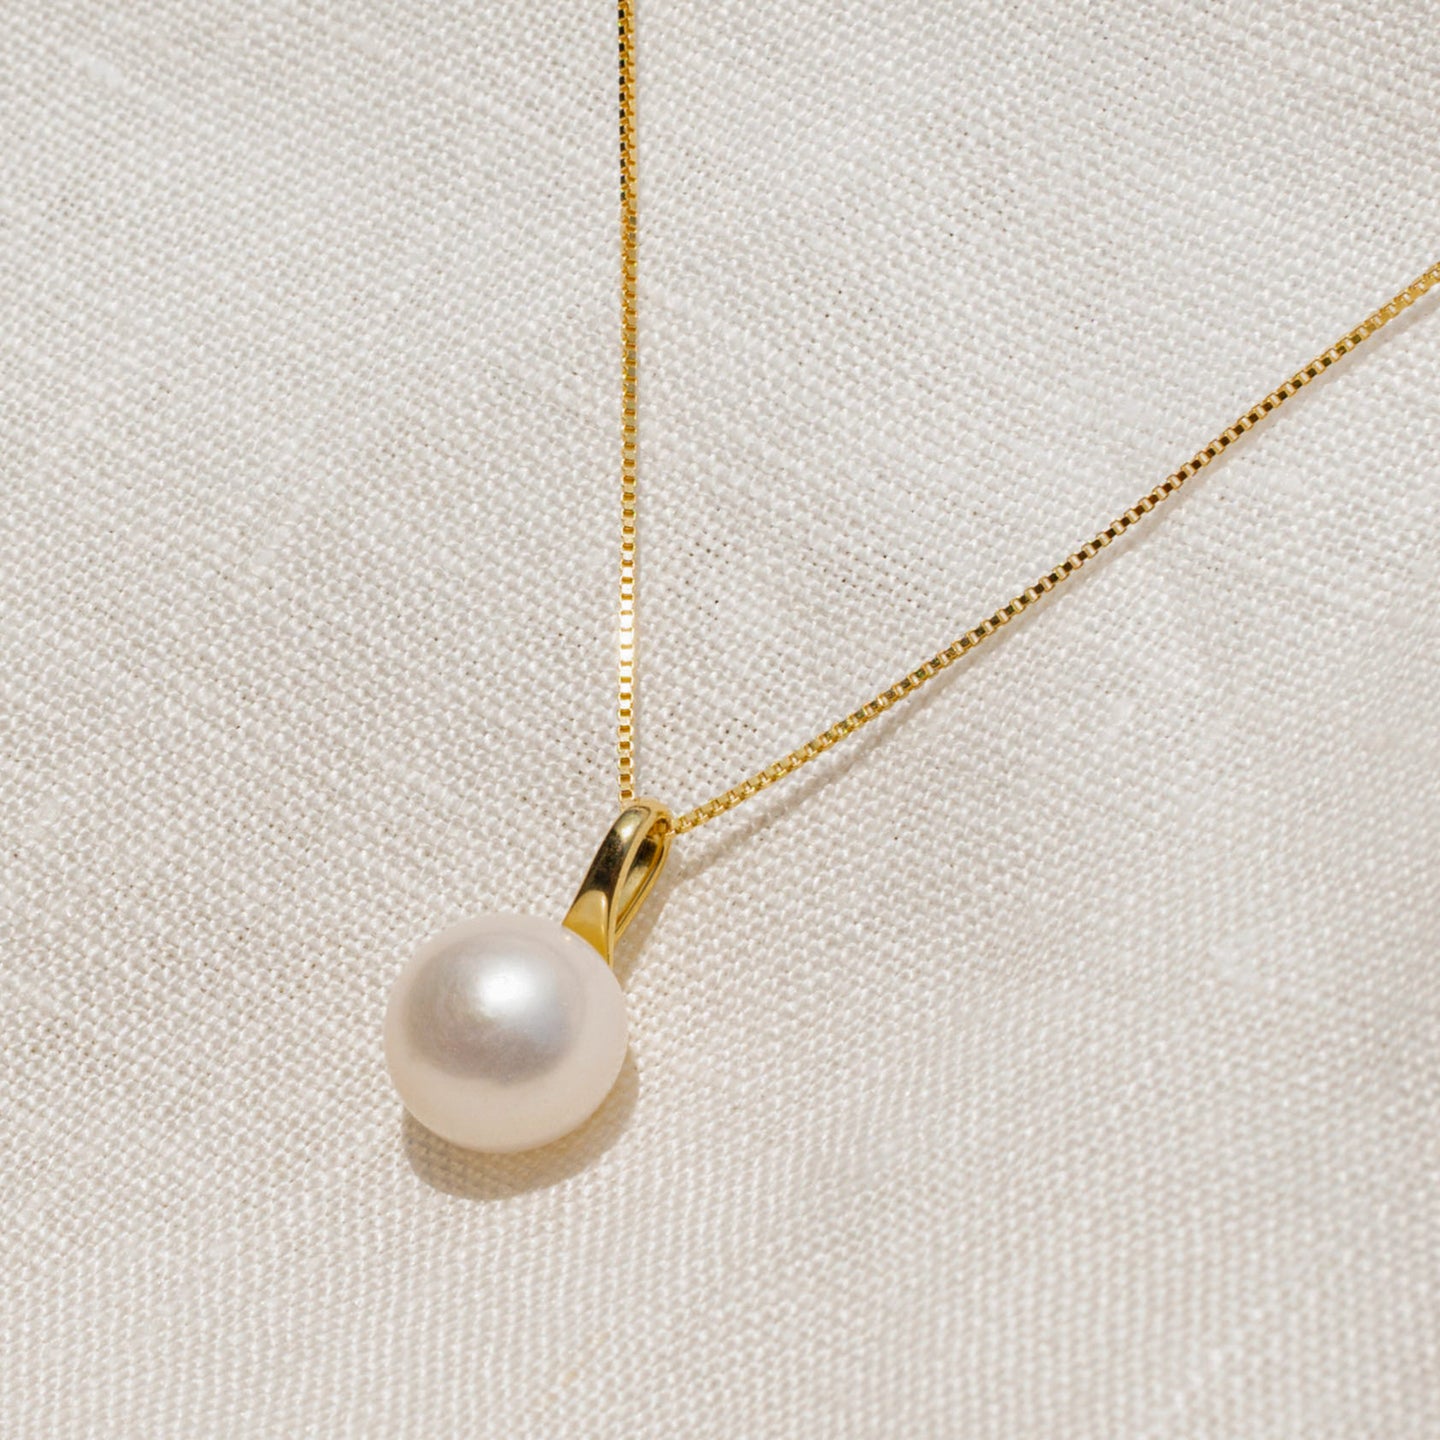 Freshwater Pearl Multiple-chain Choker Necklace. Tiny Pearl Fringe Necklace.  Drop Necklace. Station Choker. Dainty Necklace. Gift for Her - Etsy |  Stylish jewelry, Cute jewelry, Homemade necklaces